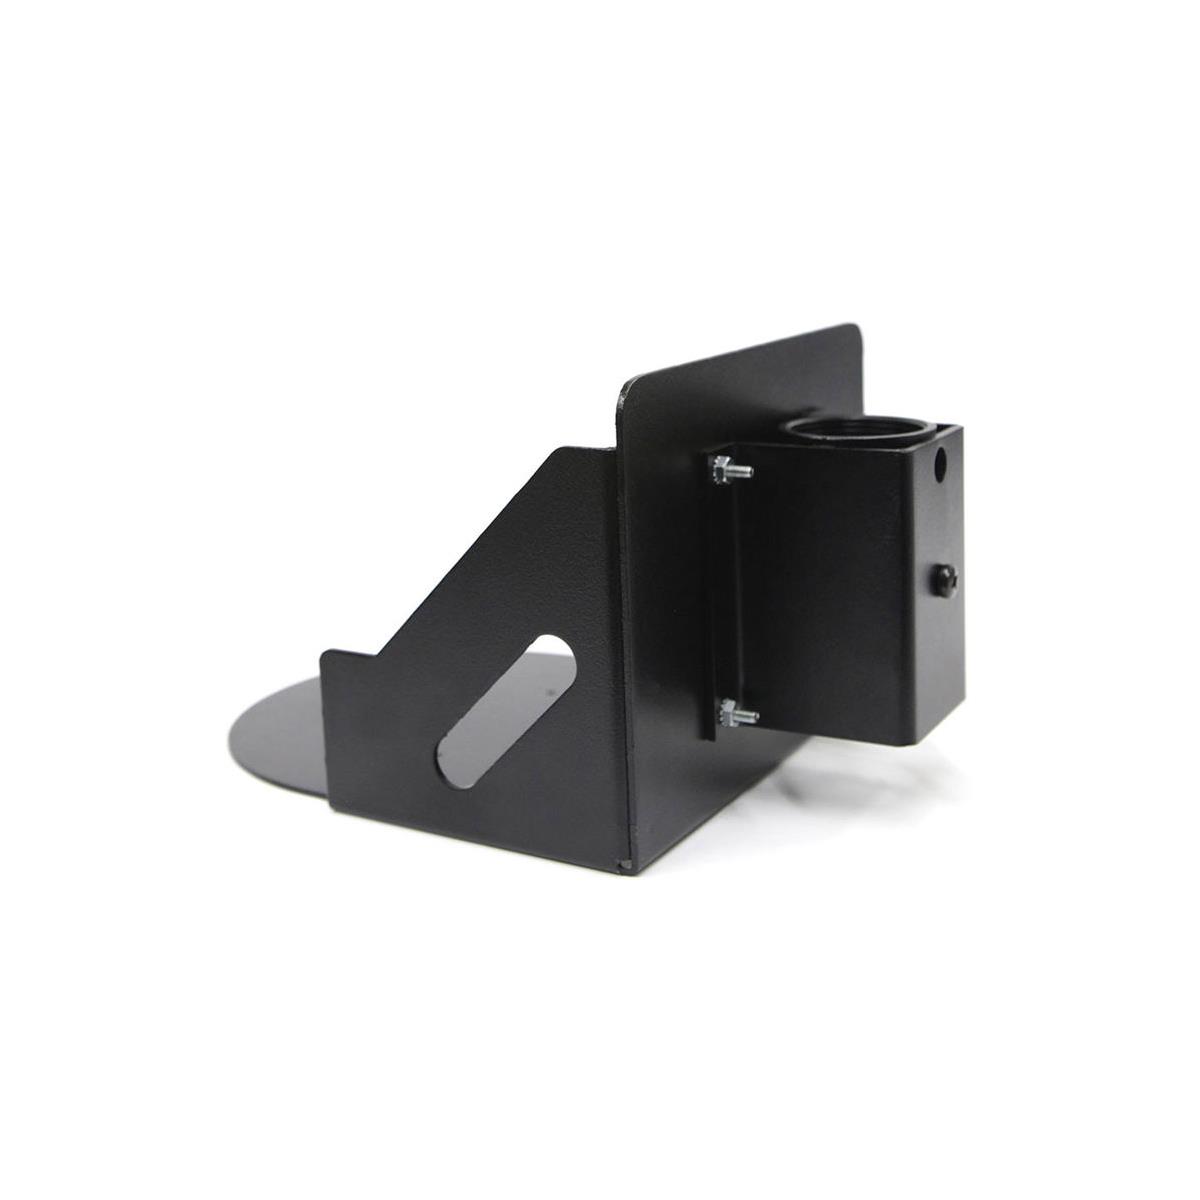 

Datavideo Professional Wall Mount Kit for PTC-150 and PTC-150T Cameras